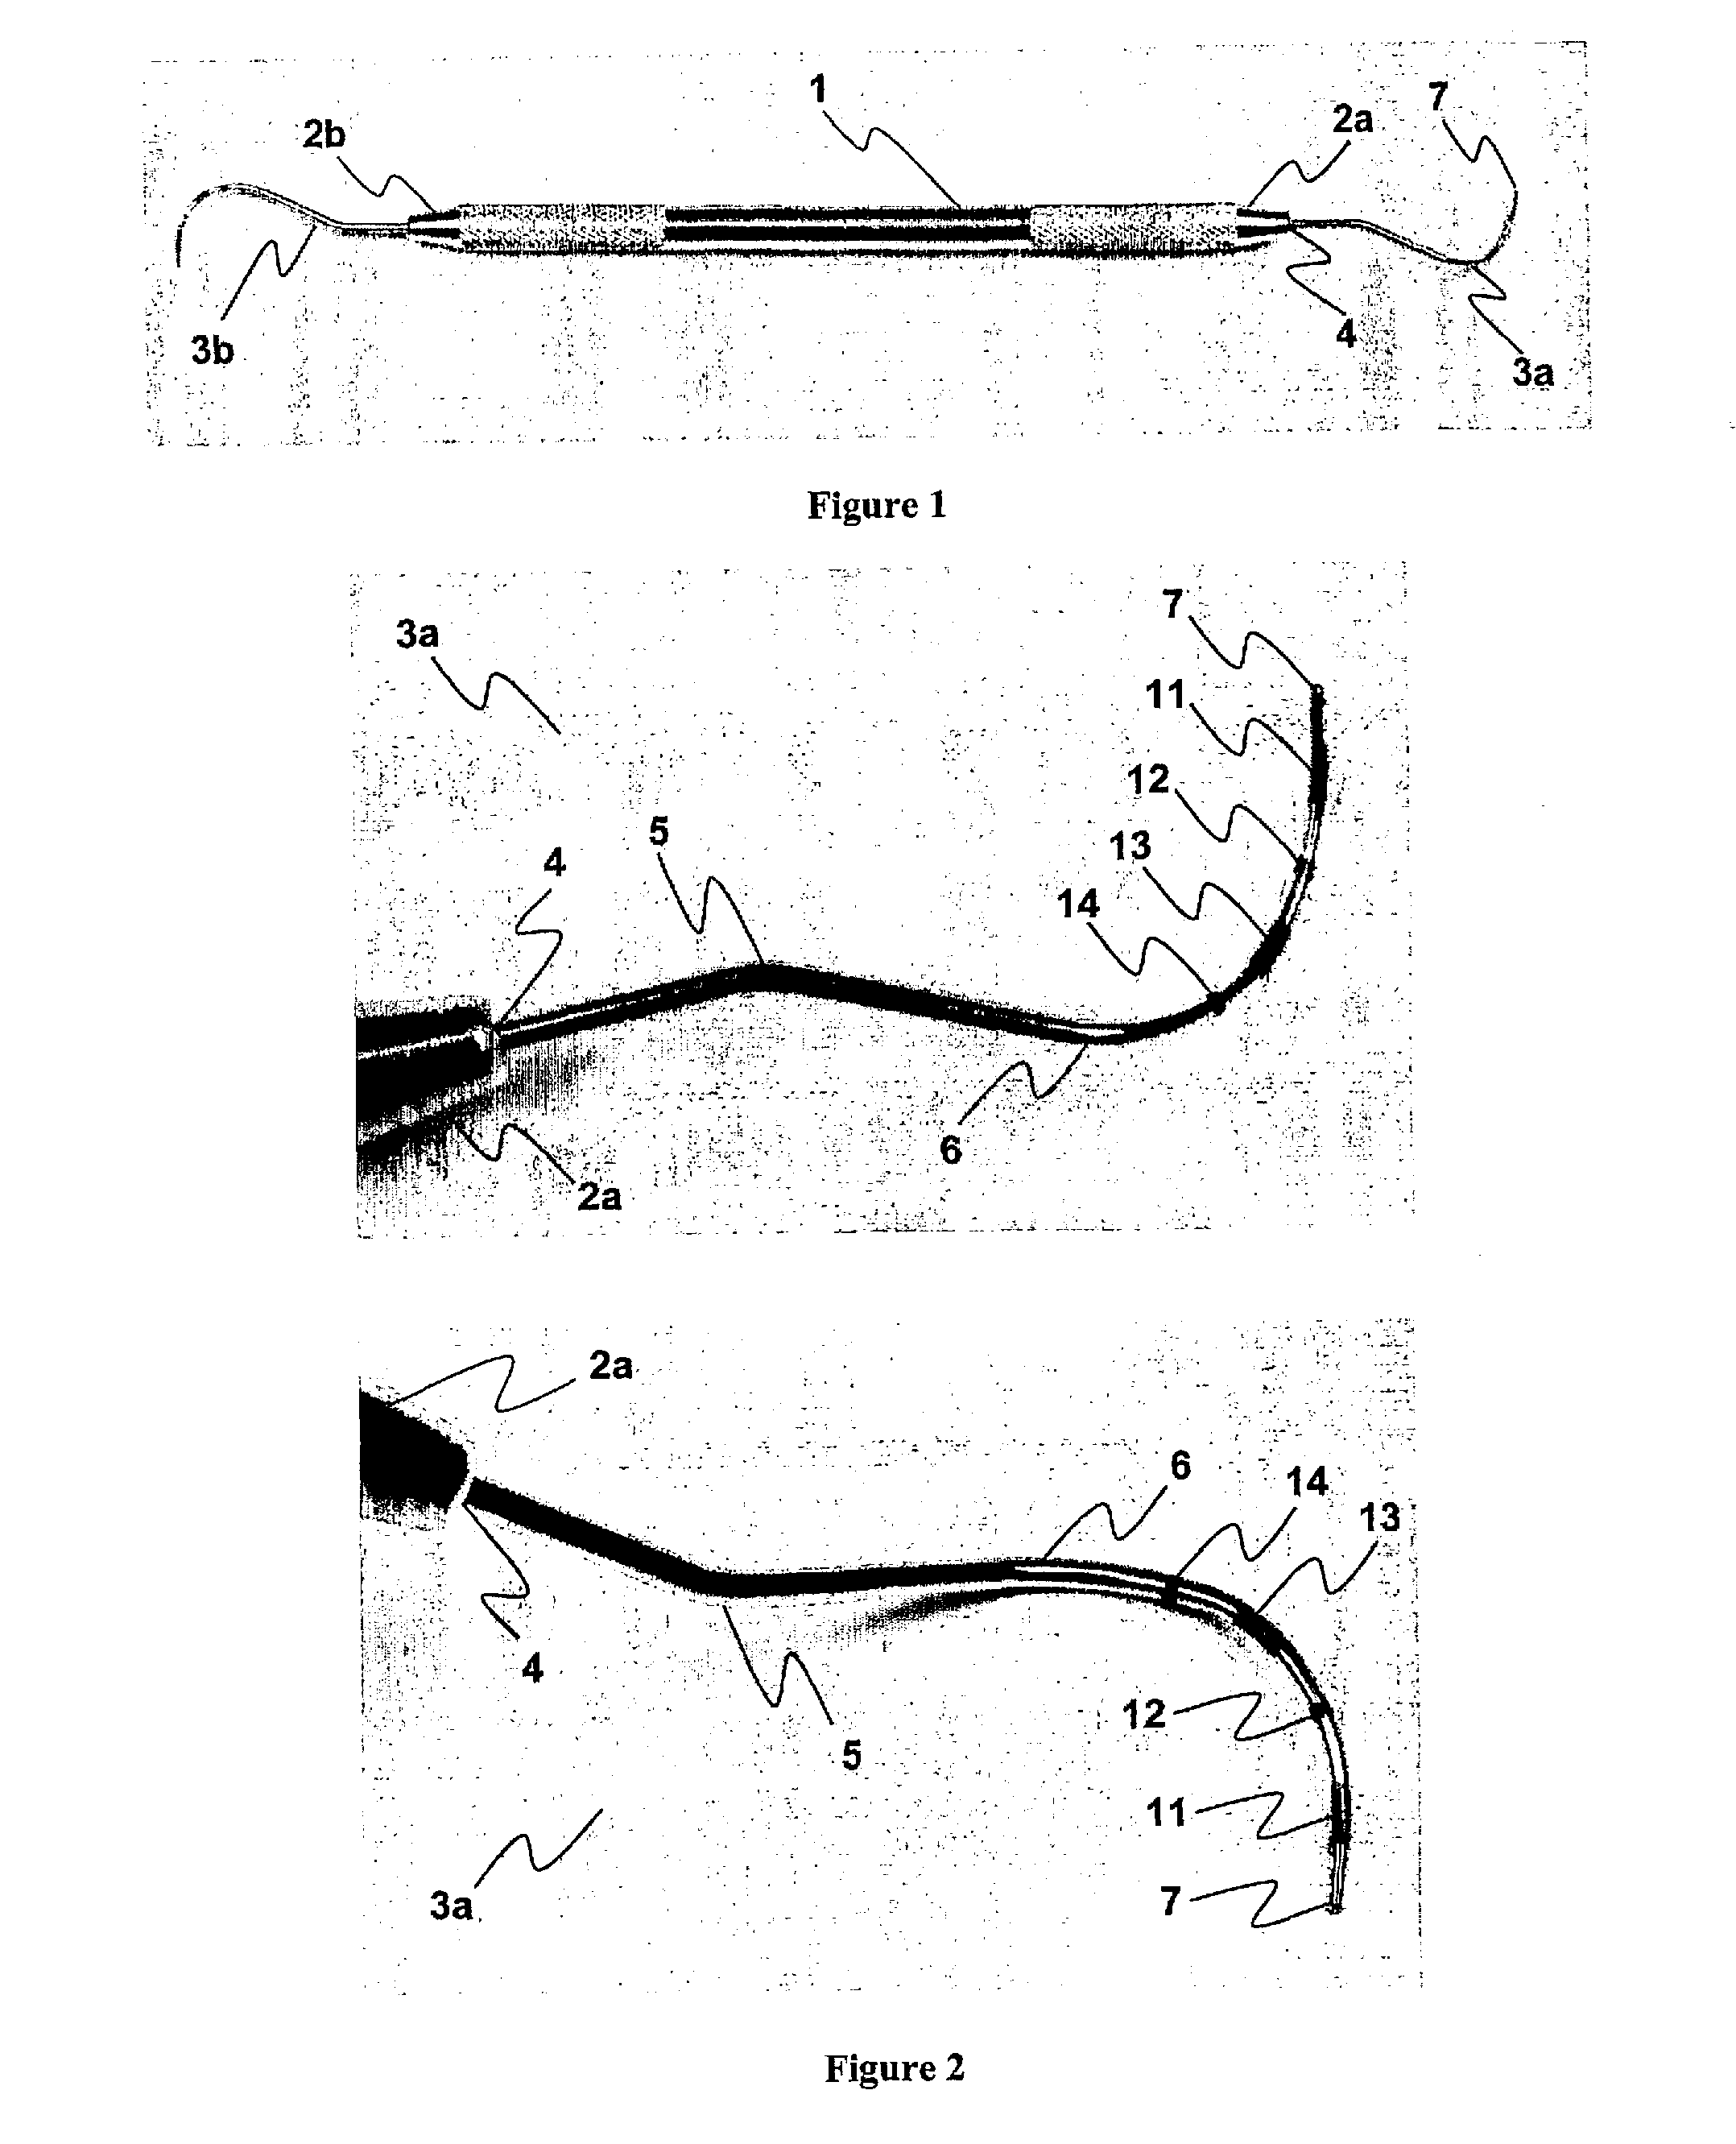 Method and Tool For Oral Substrate Measurement In Animals